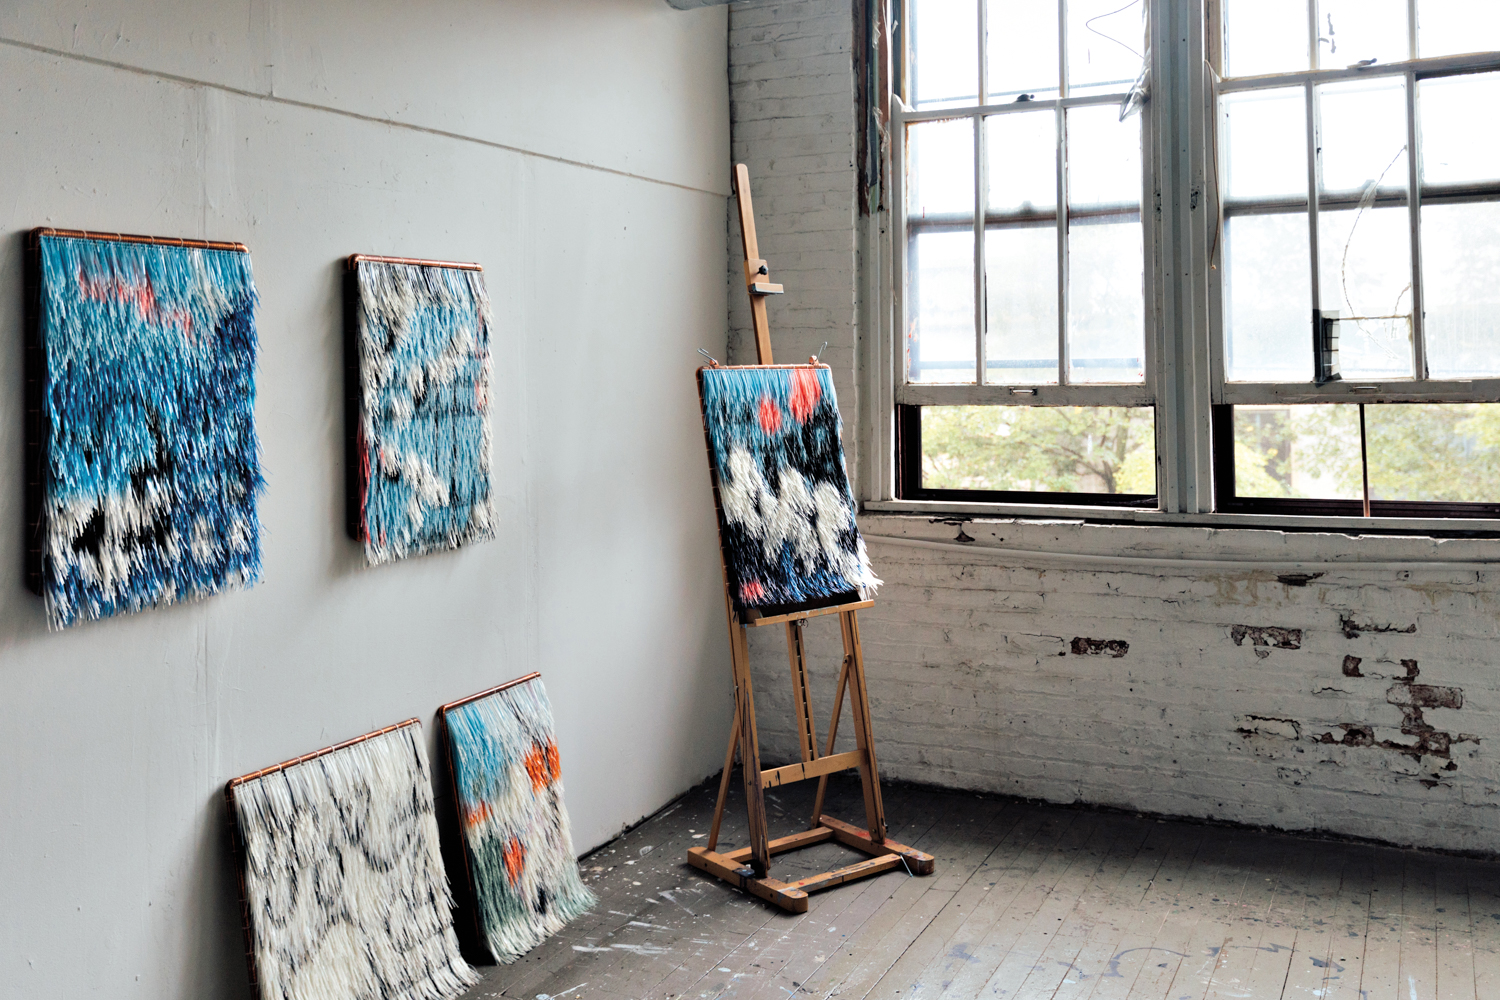 Five fringed artworks- two hanging on a wall, two leaning against a wall and one on an easel